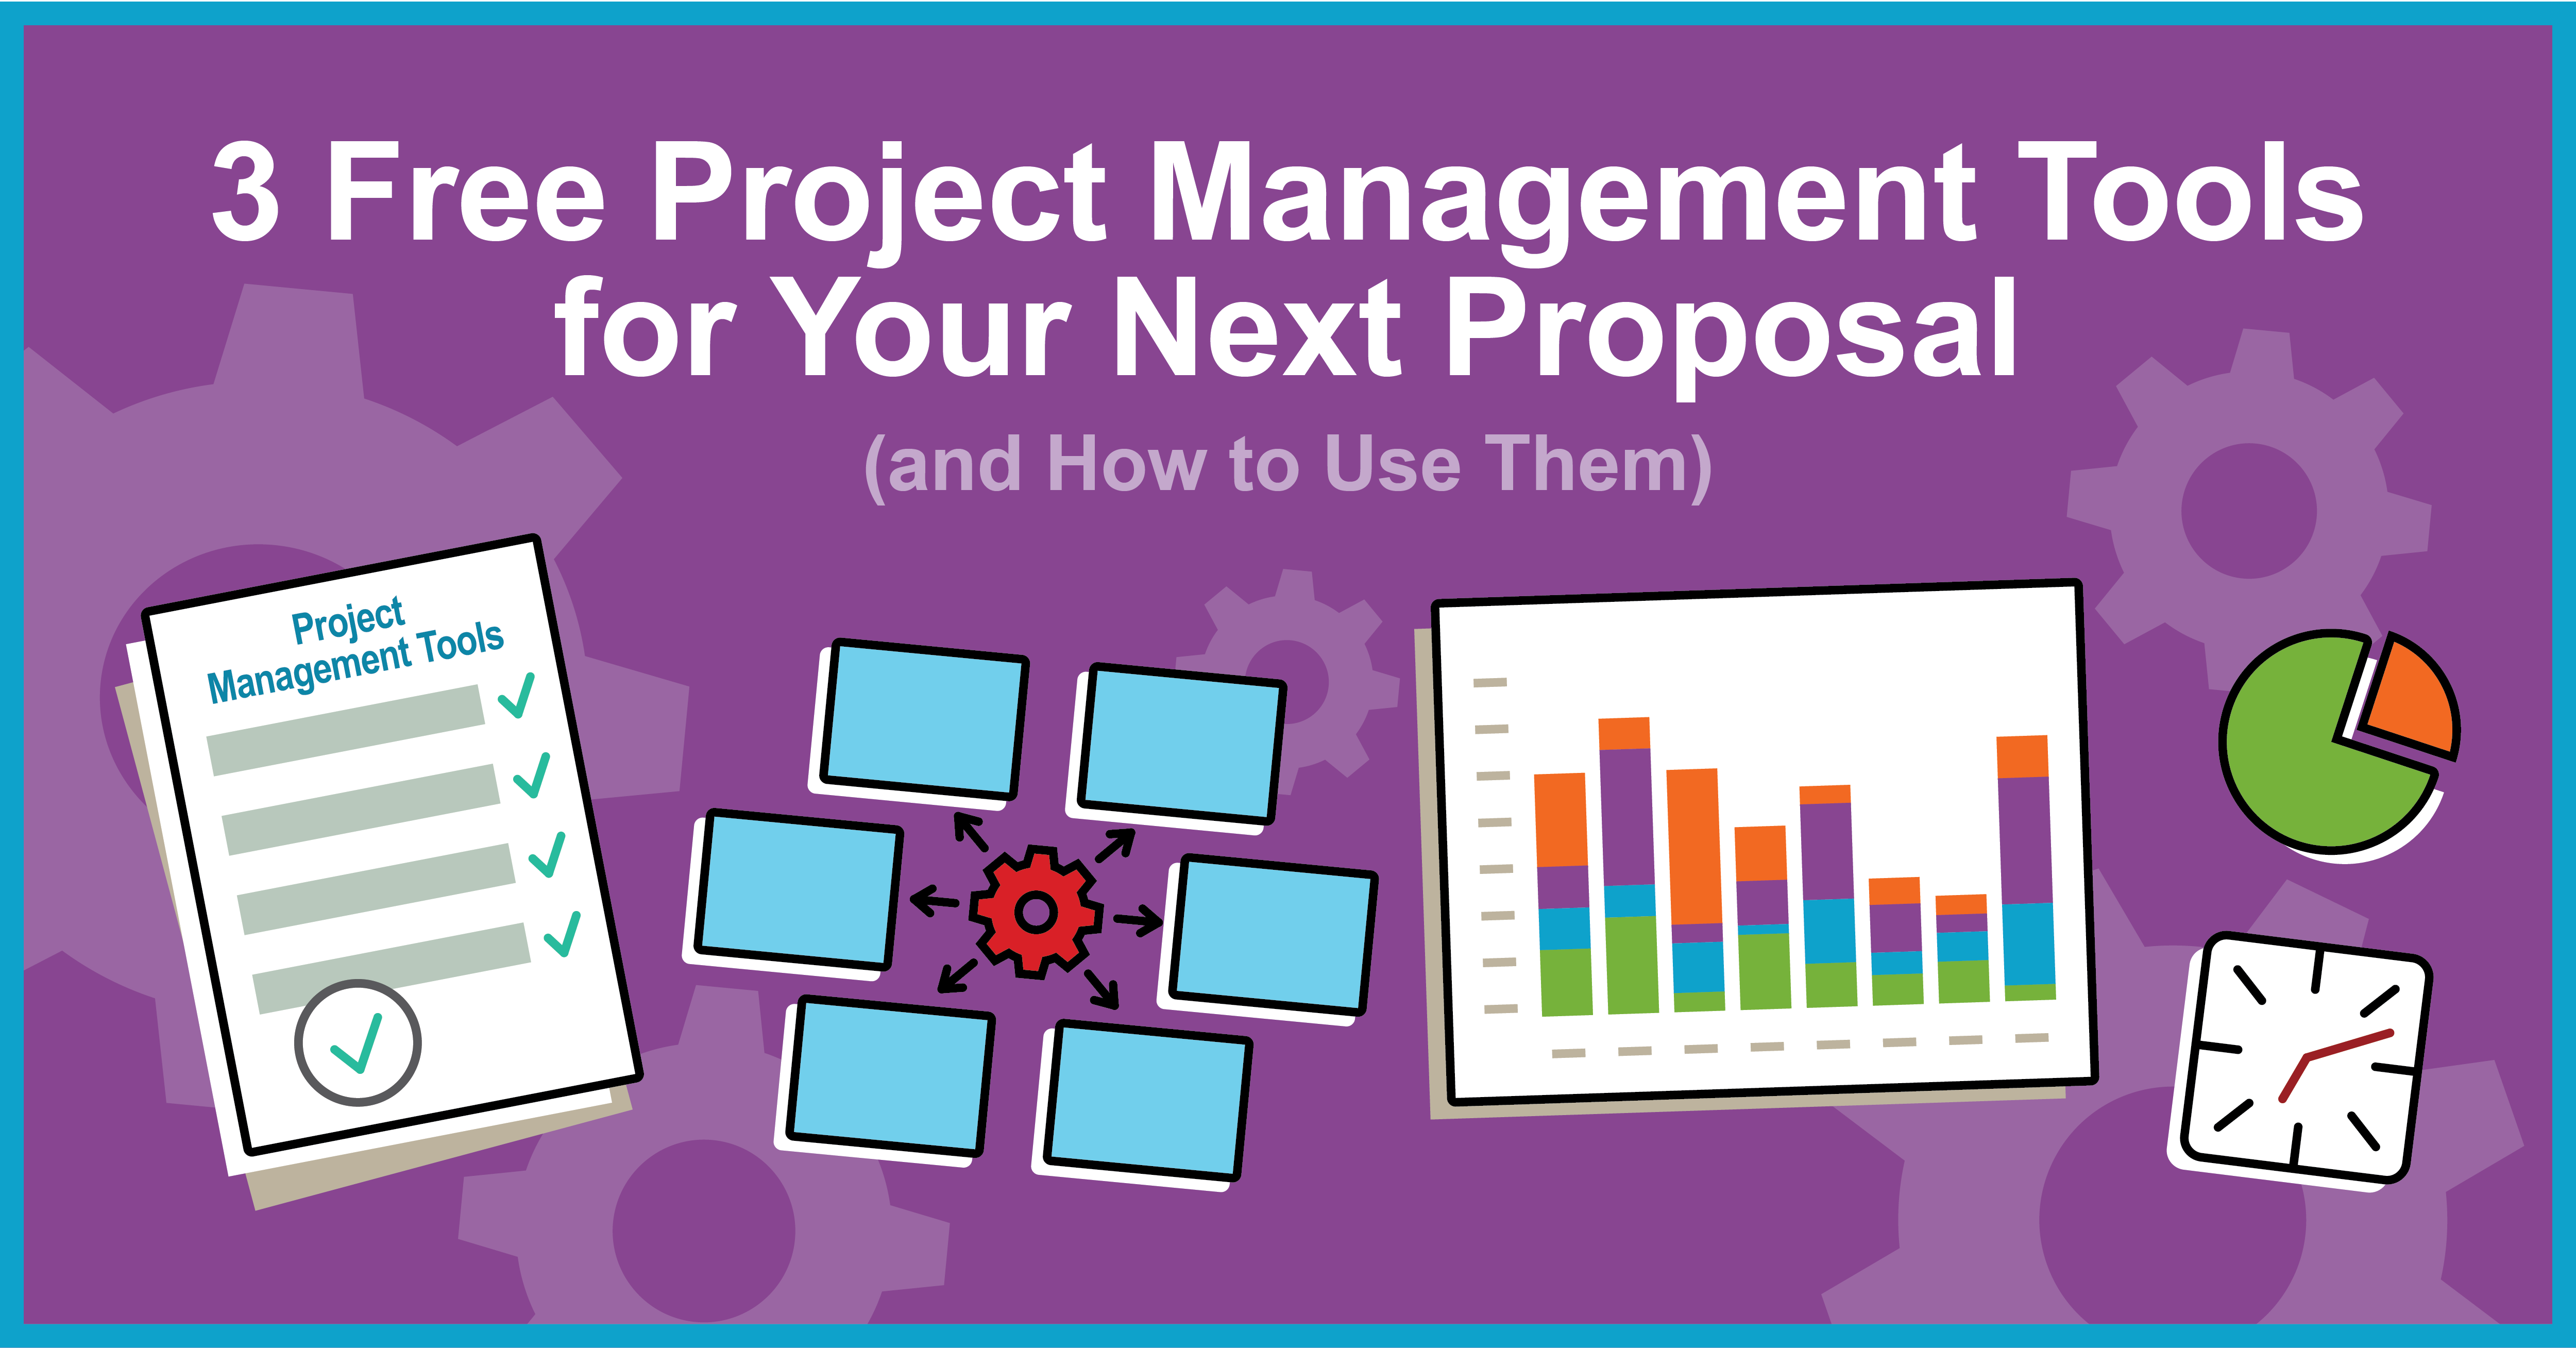 3 Free Project Management Tools for Your Next Proposal (and How to Use